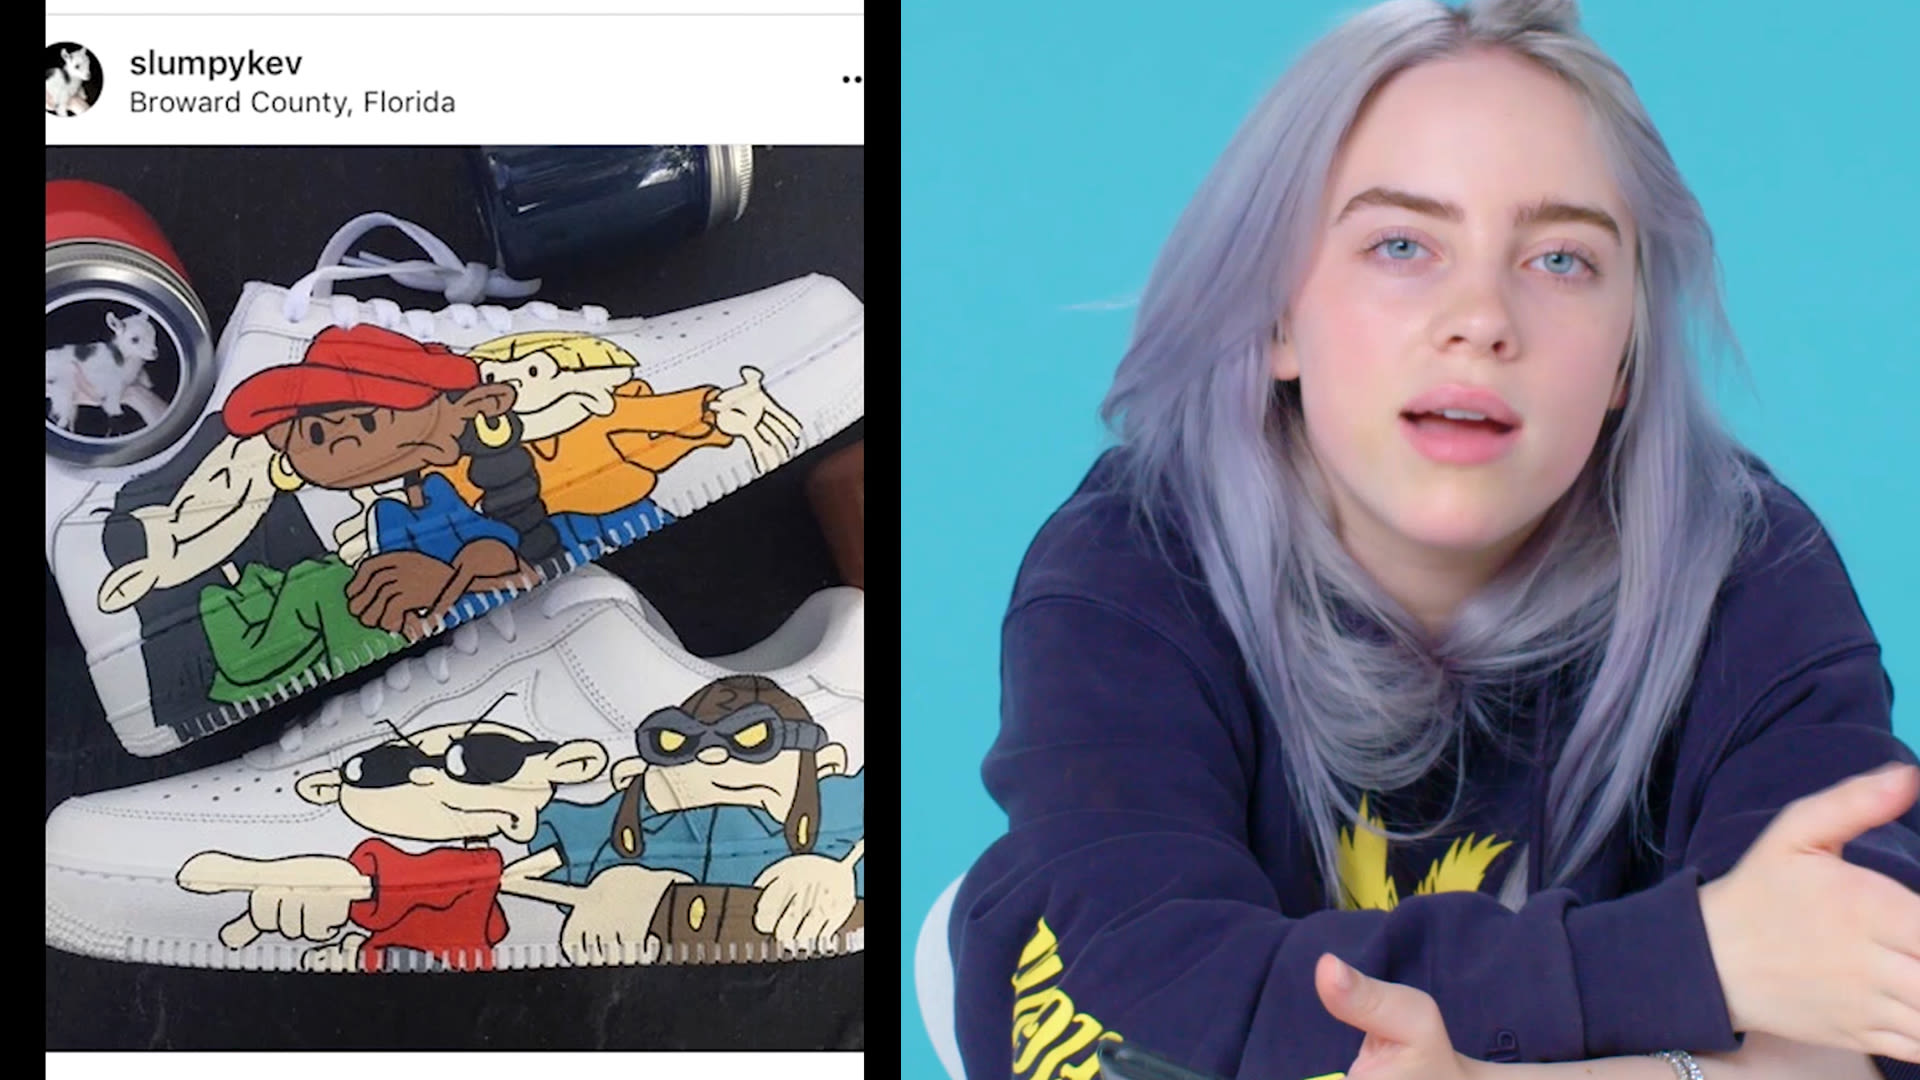 Watch Billie Eilish Guesses How 4,669 Fans Responded to a Survey About Her, Fan Survey